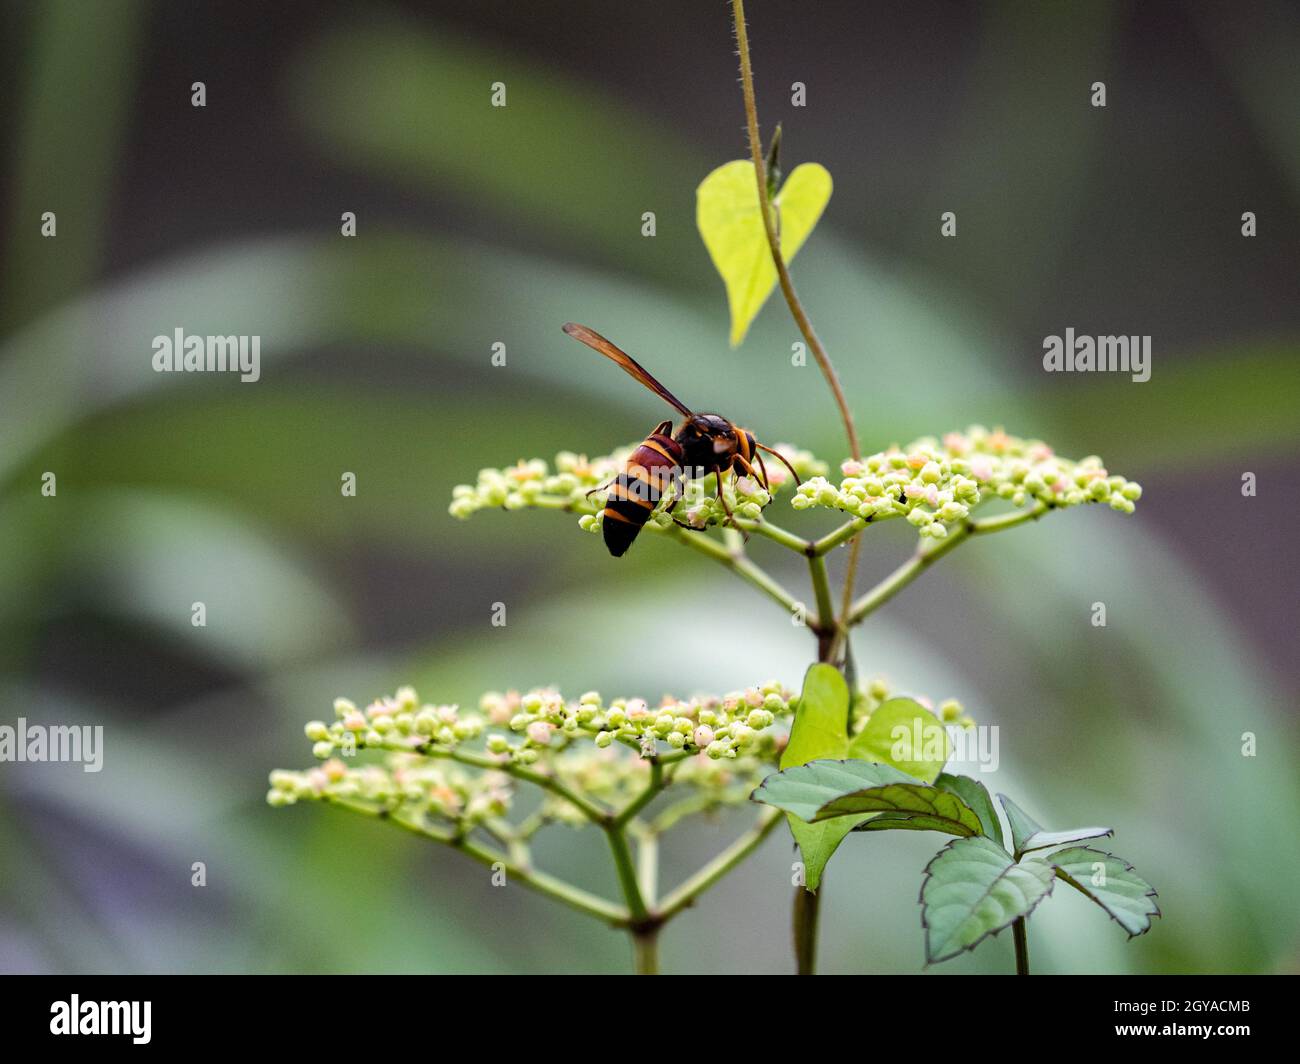 Closeup shot of a Japanese giant hornet on a small bushkiller vine flower from behind Stock Photo